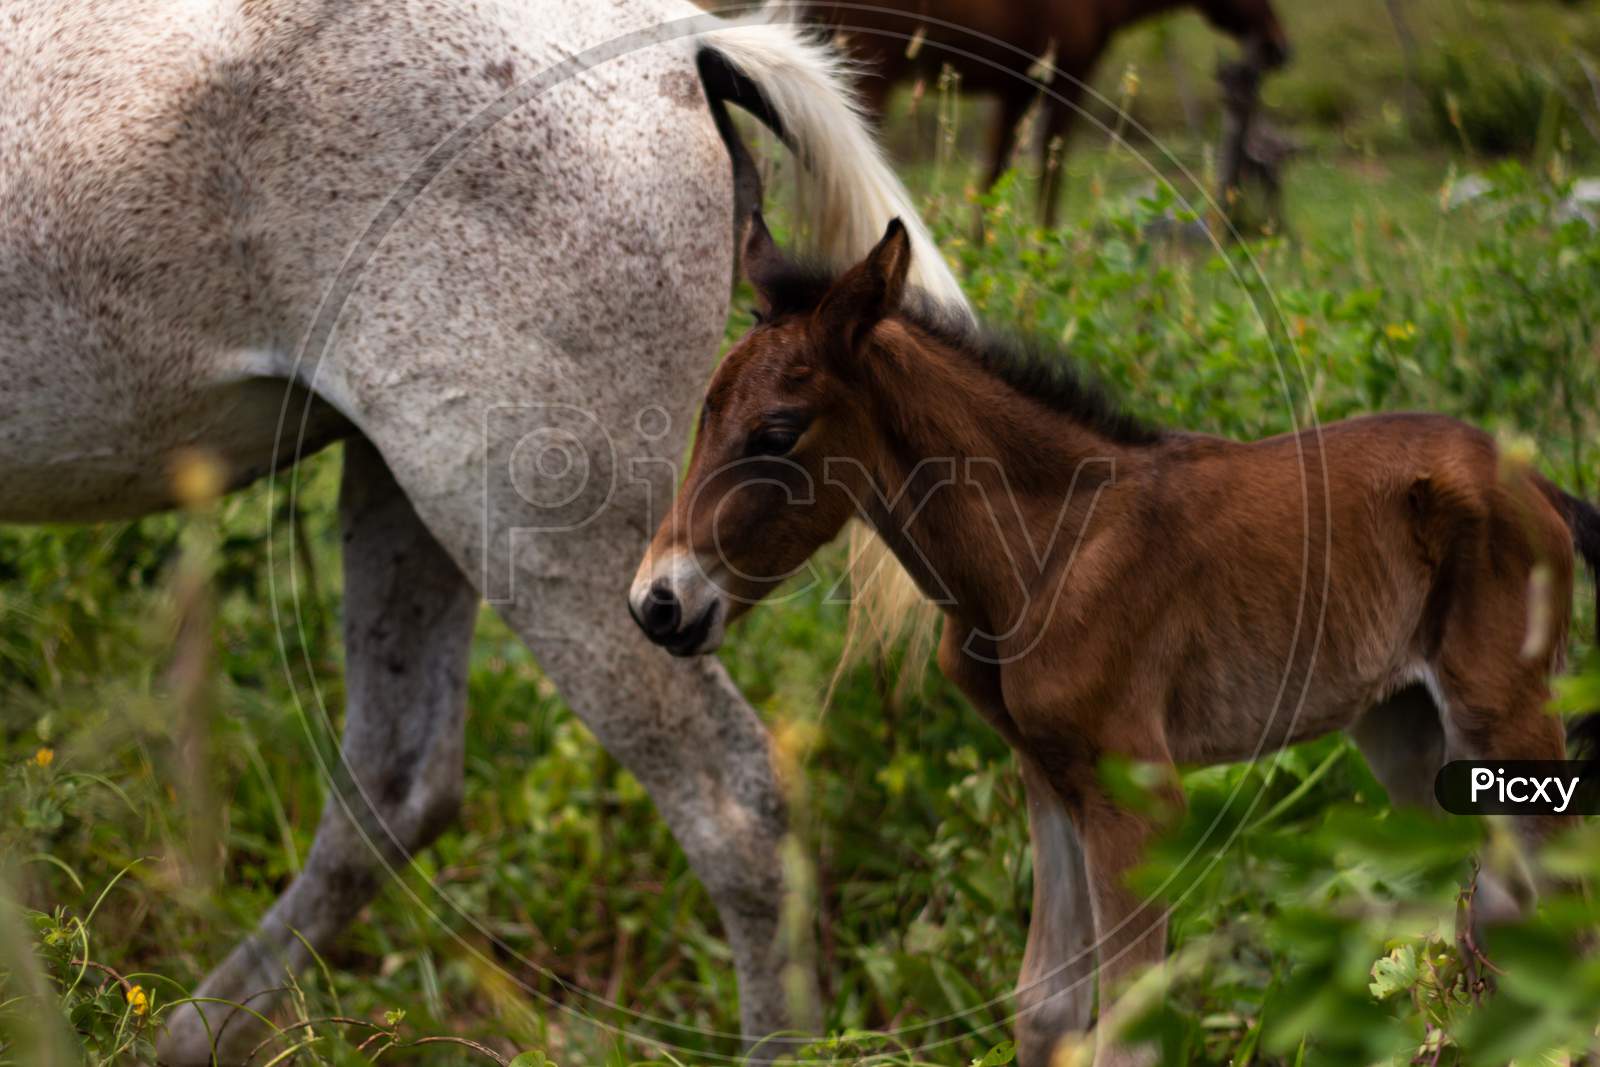 Little Newborn Baby Horse With His Mother. Large Mammalian Animal.